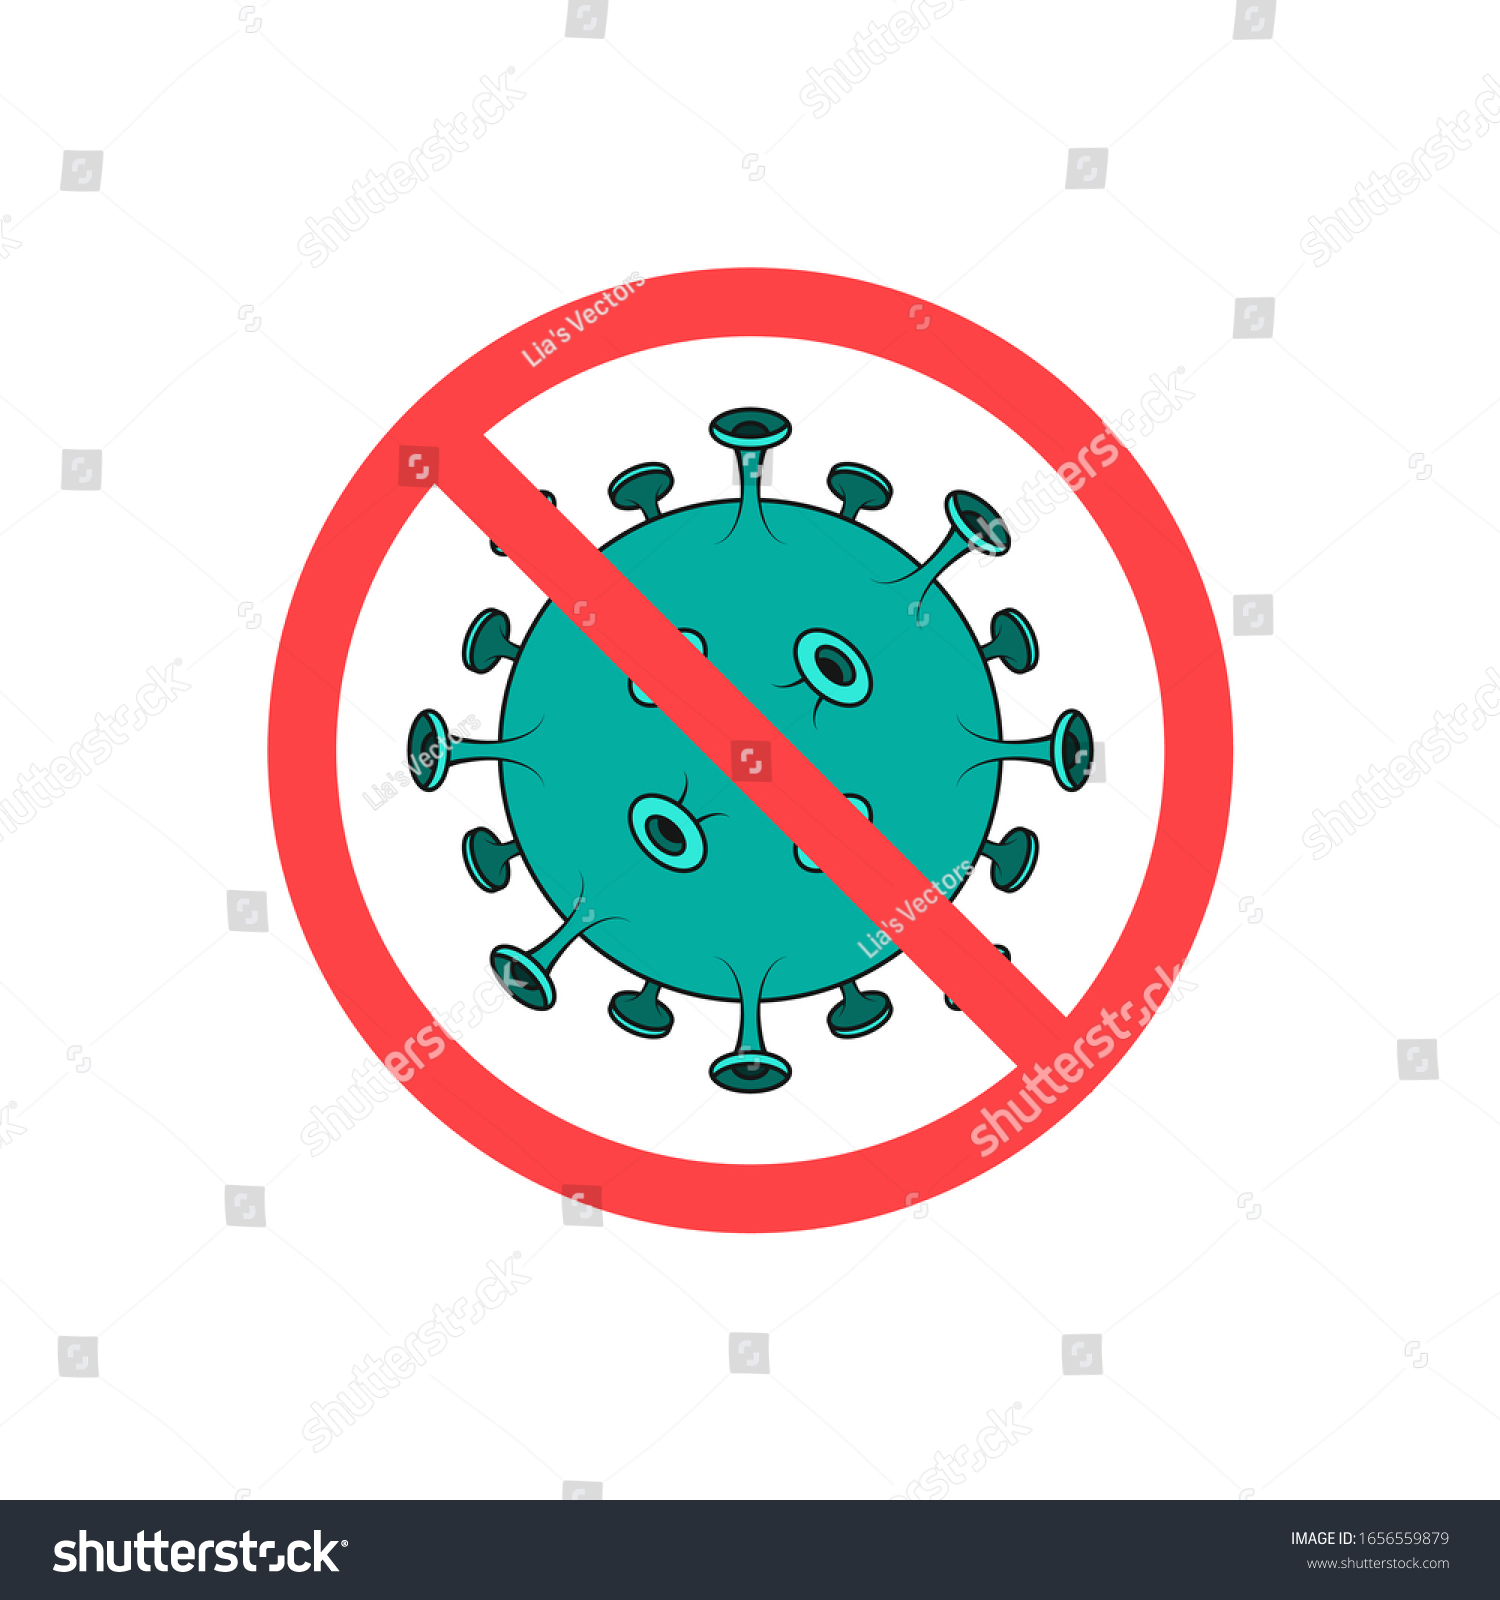 Coronavirus Icon with Red Prohibit Sign, 2019-nCoV Novel Coronavirus Bacteria. No Infection and Stop Coronavirus Concepts. Dangerous Coronavirus Cell in China, Wuhan. Isolated Vector Icon #1656559879